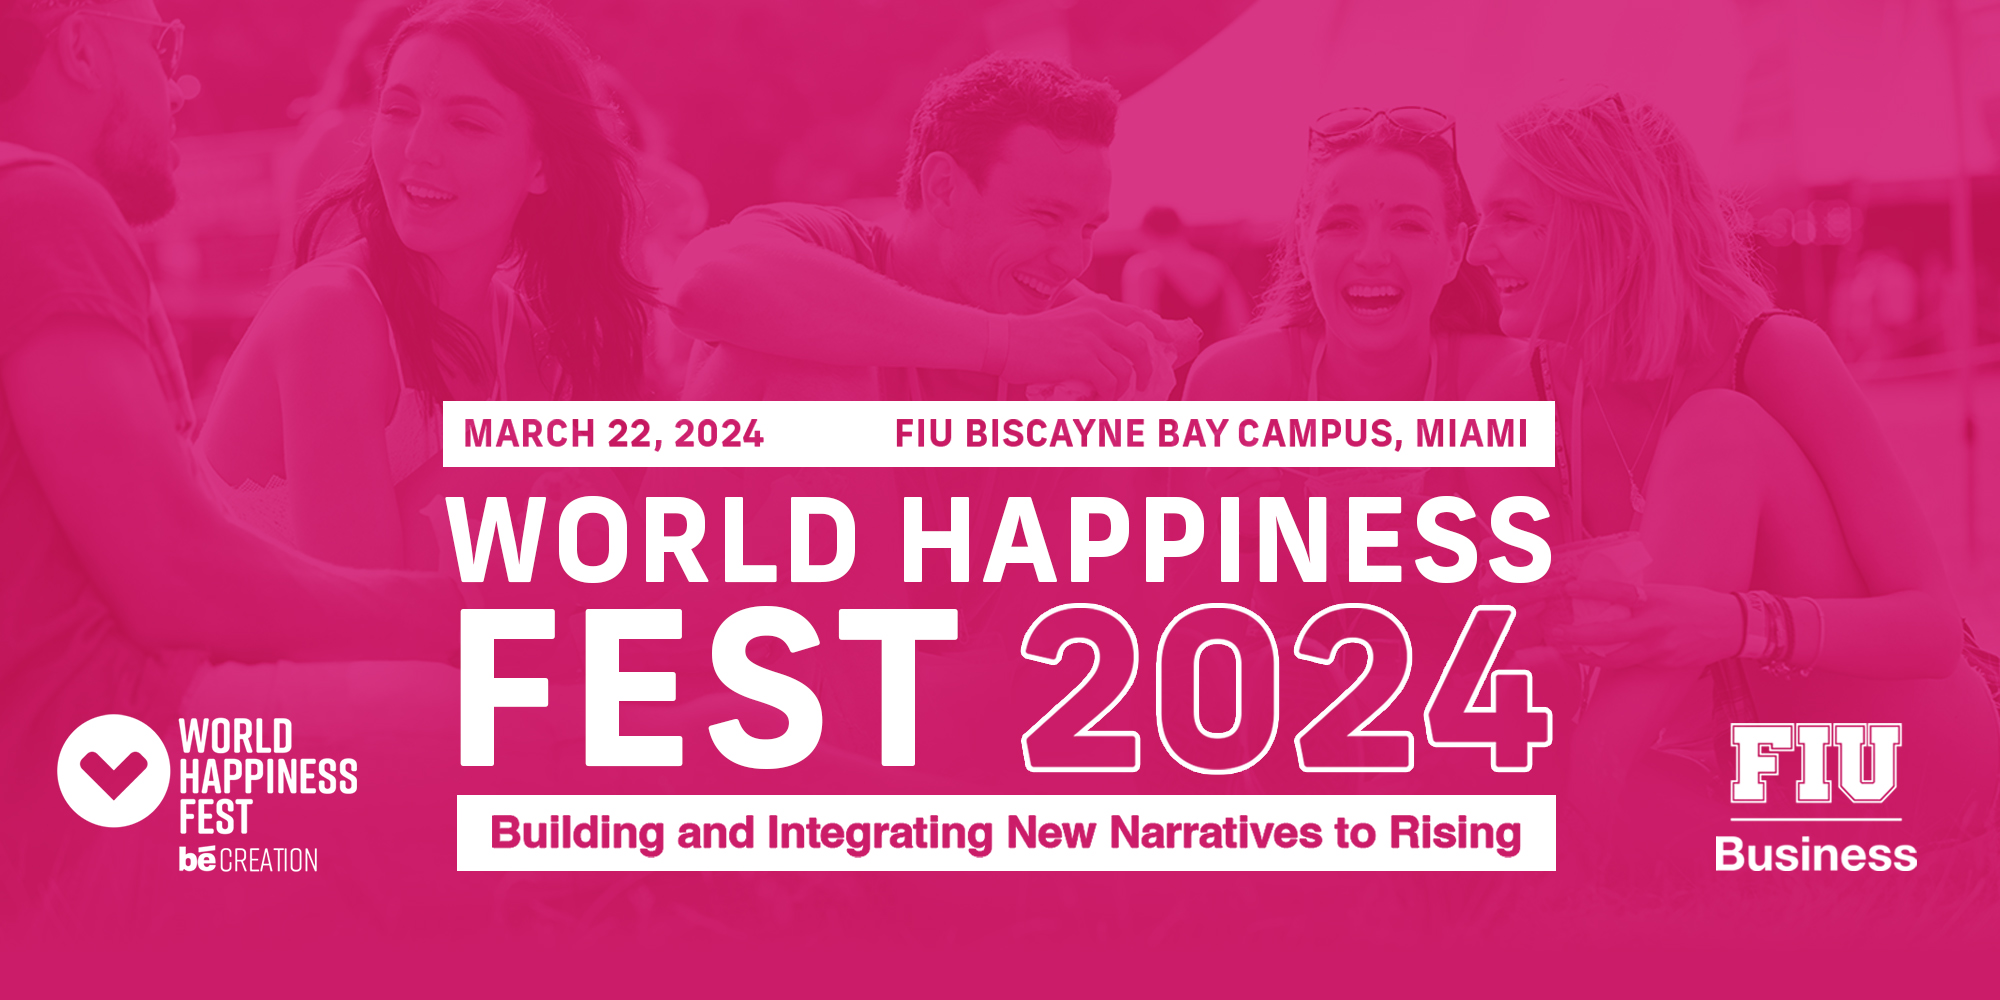 World Happiness Fest 2024. Find the purpose of your life.